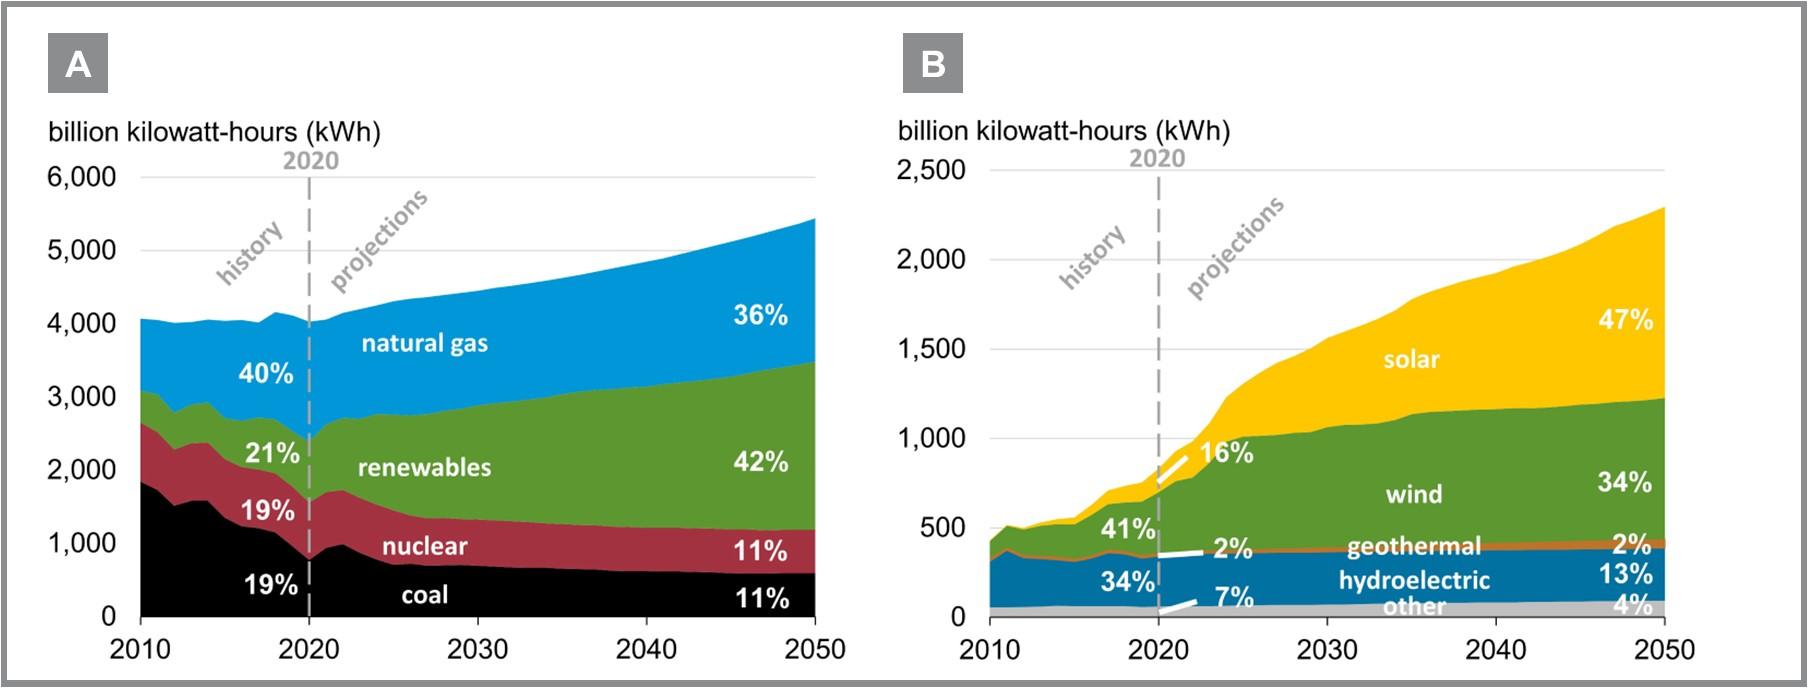 Figure 1. A) Electricity generation from selected fuels (EIA, 2021a); and B) Renewable electricity generation from selected fuels (EIA, 2021a).